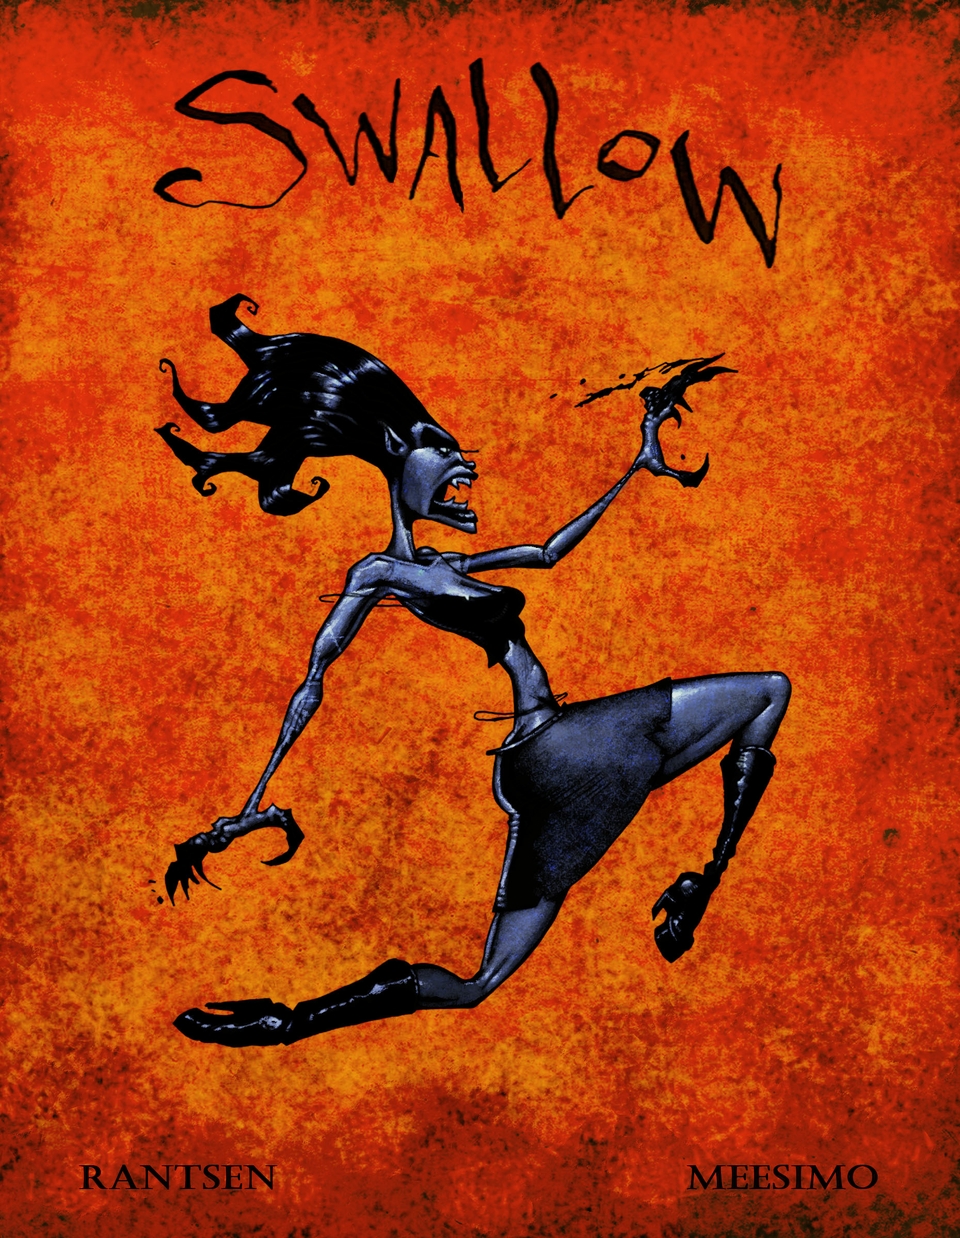 SWALLOW: Vamps in the Big City